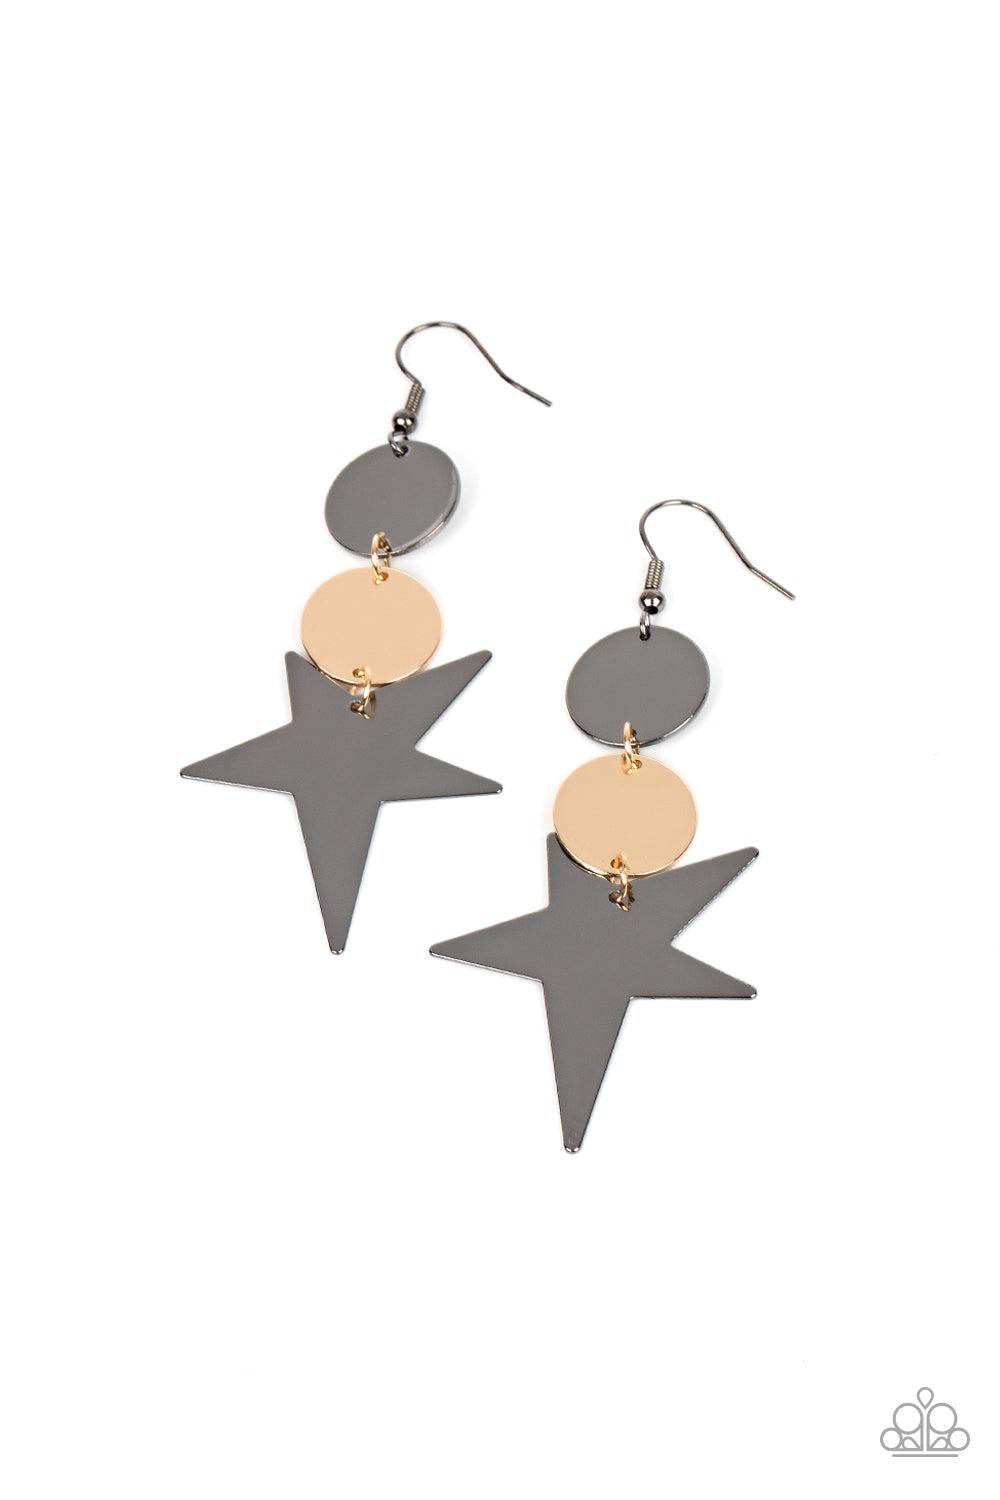 Star Bizarre Multi Gunmetal and Gold Earrings - Paparazzi Accessories- lightbox - CarasShop.com - $5 Jewelry by Cara Jewels